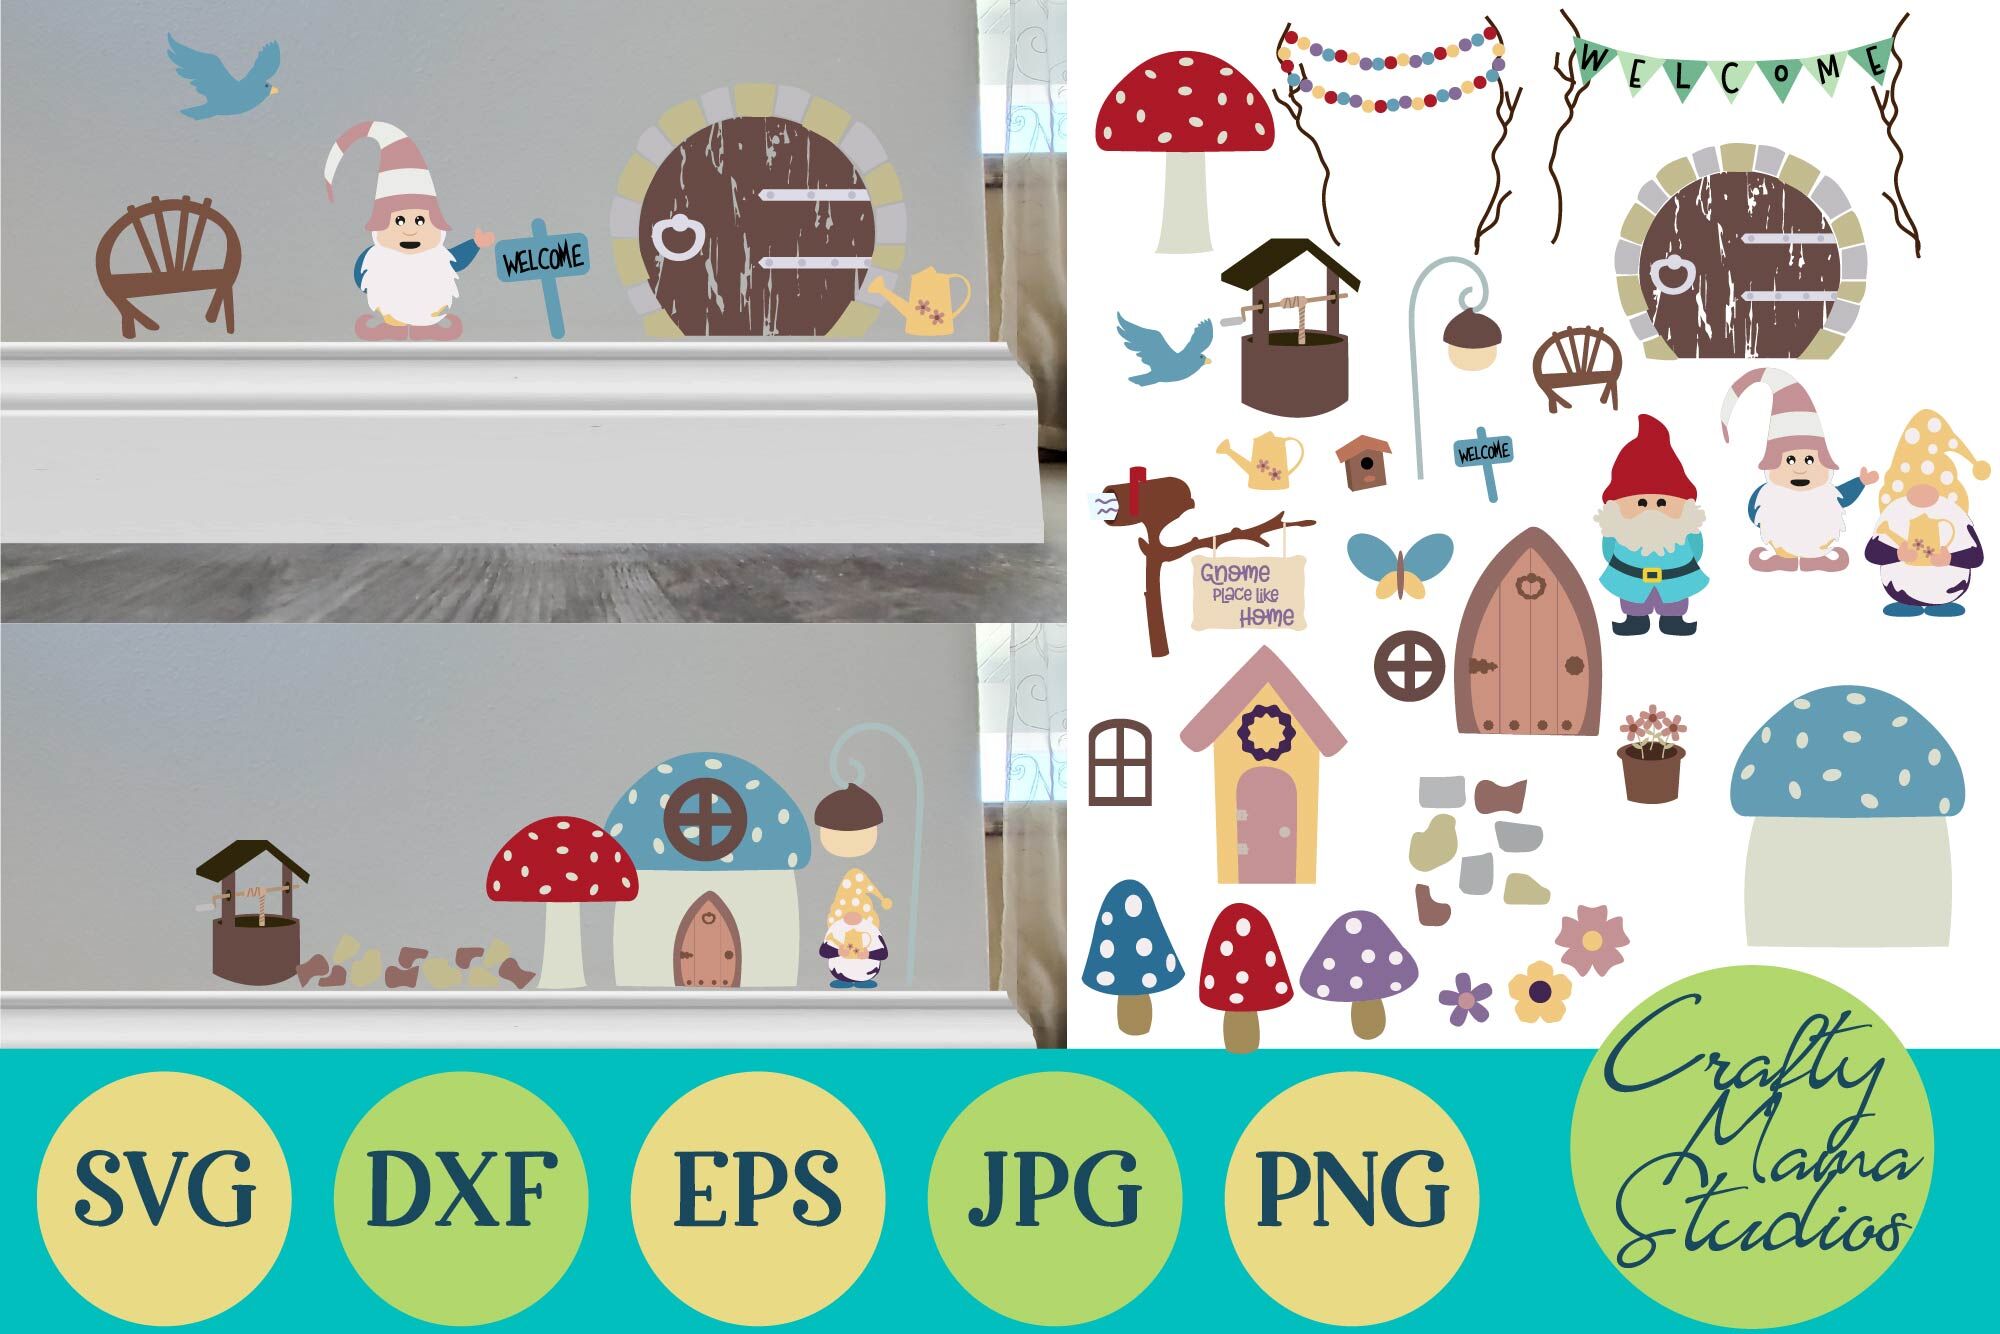 Create Your Own Gnome Home Svg Cut File Gnome Fairy House By Crafty Mama Studios Thehungryjpeg Com